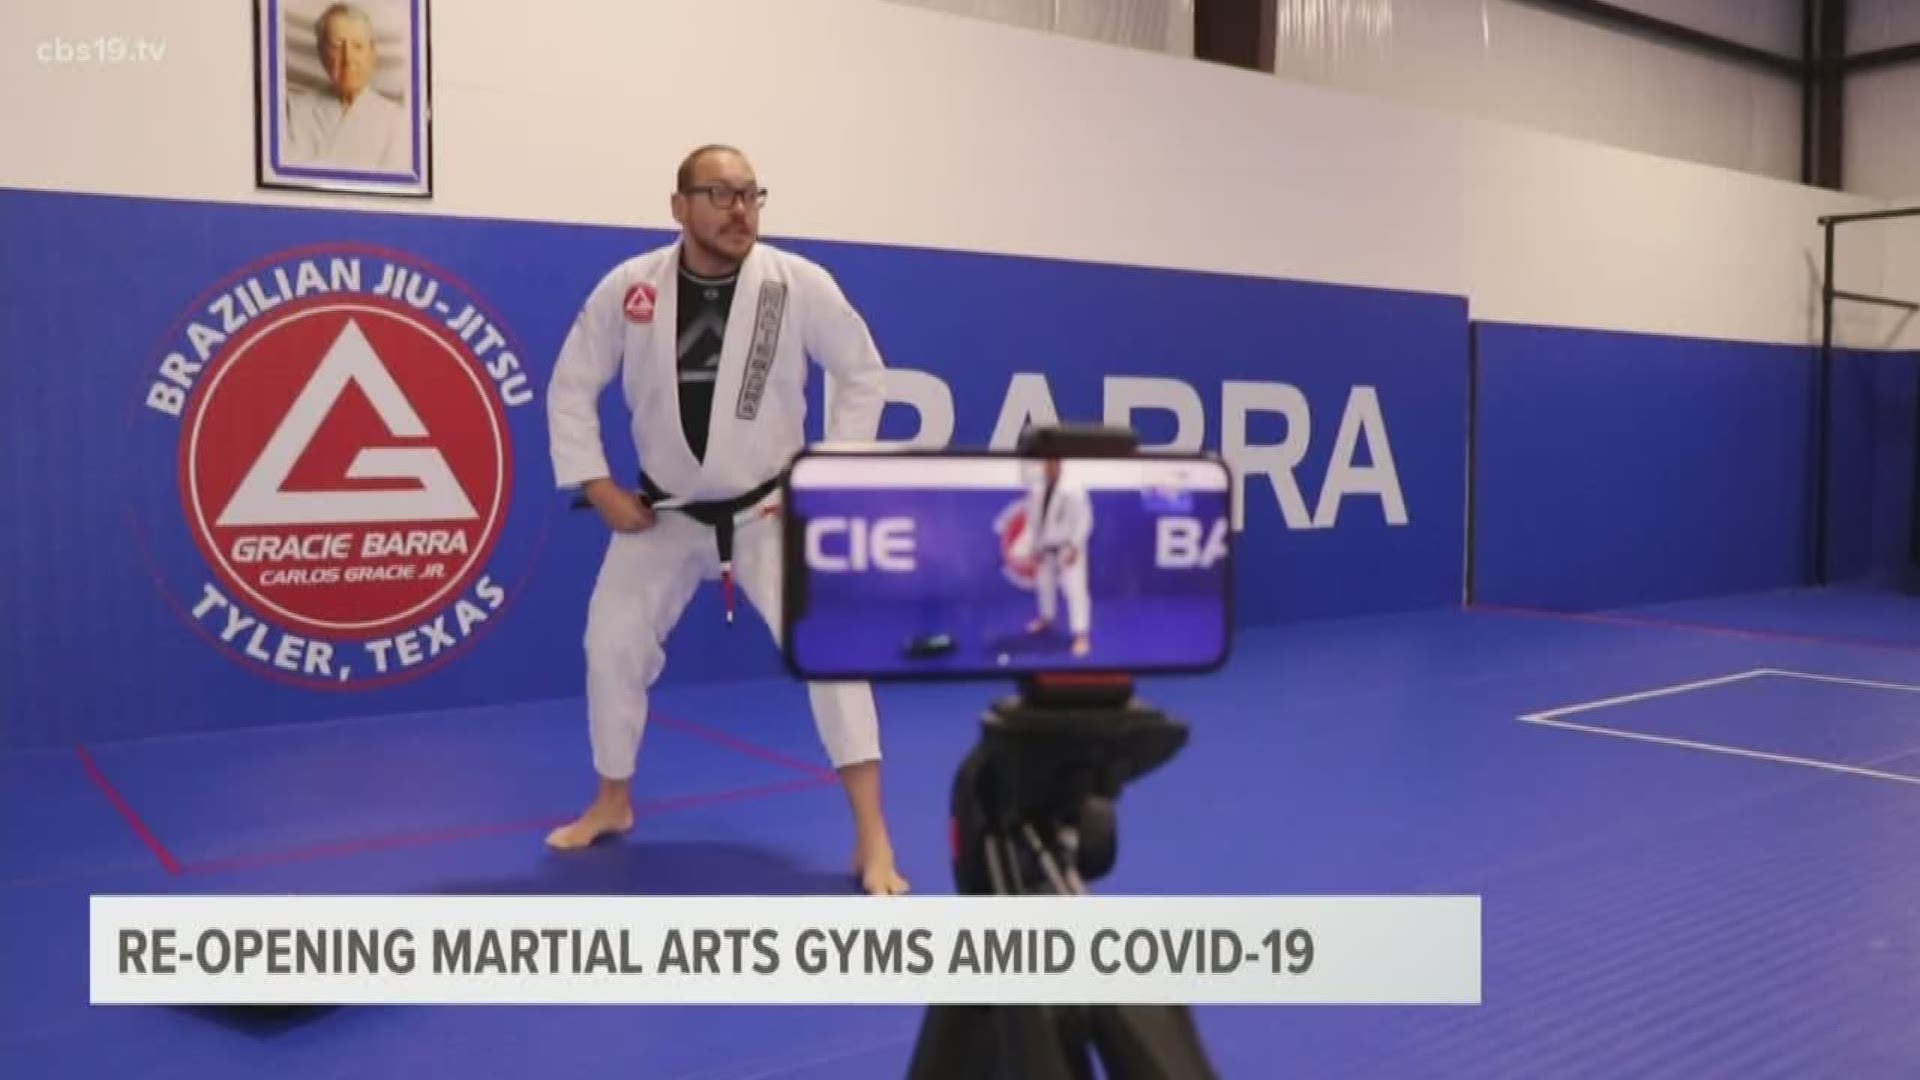 Martial arts gyms face unique challenges in re-opening.